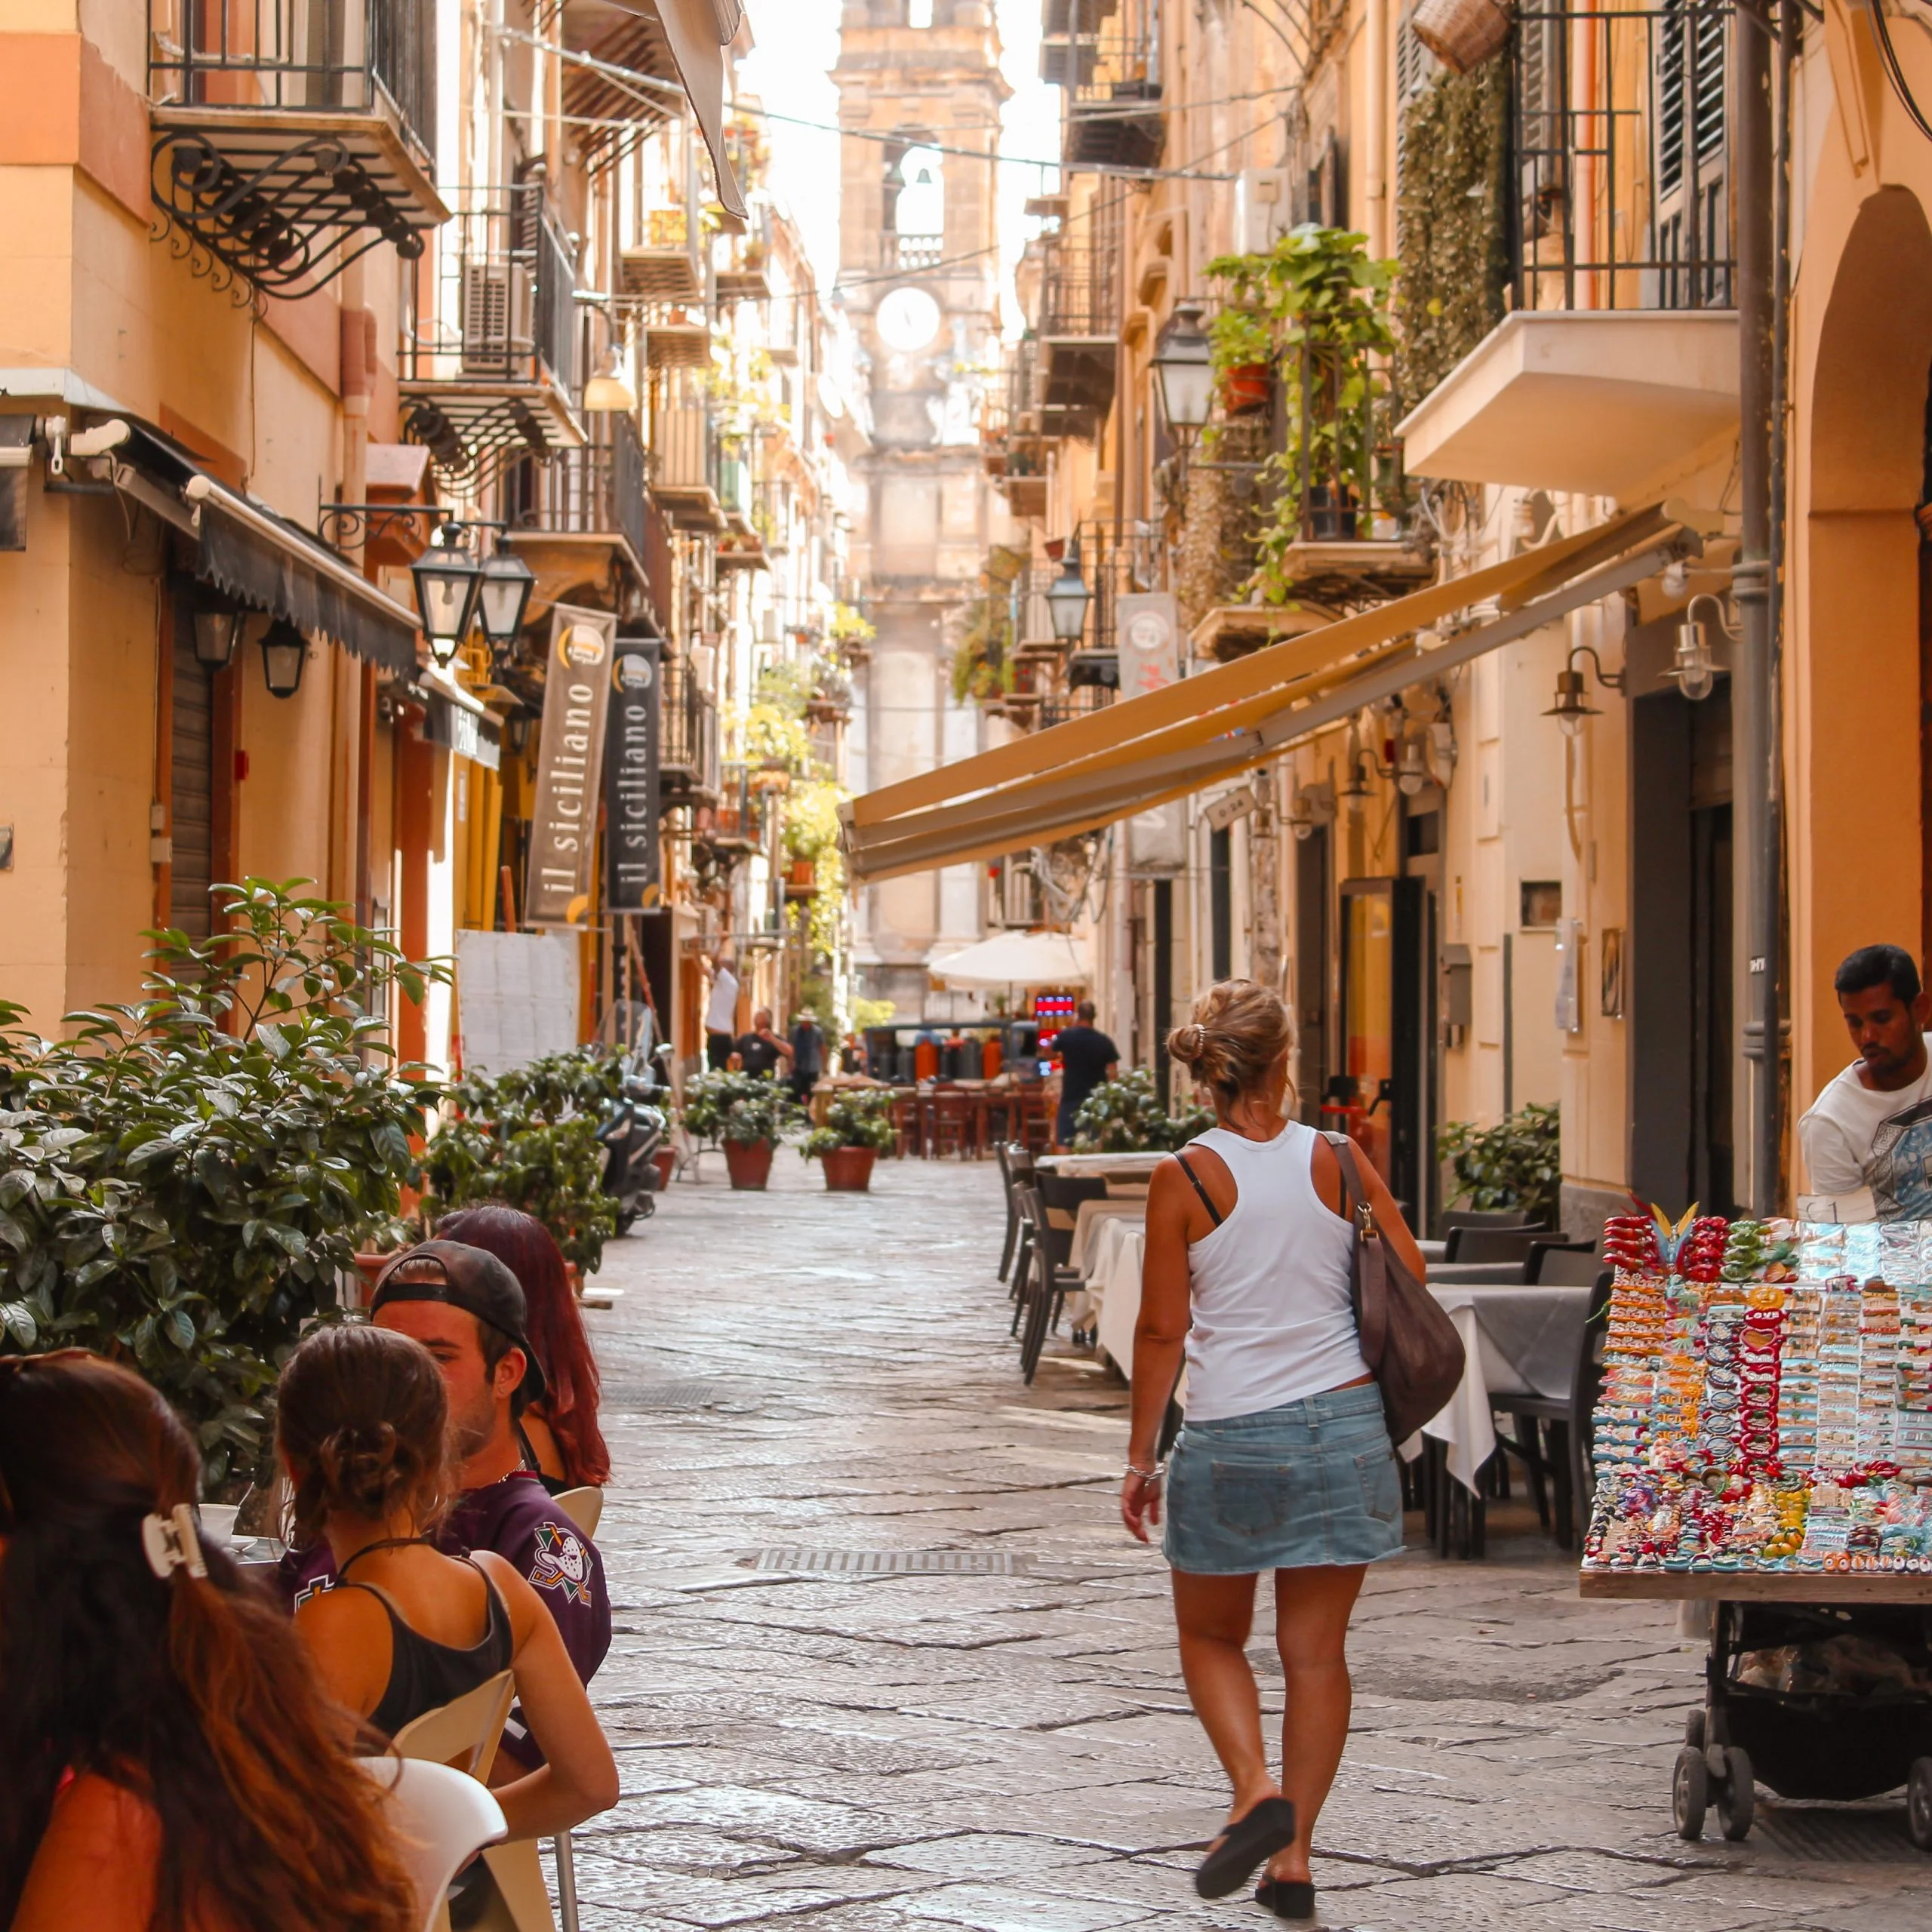 Local insights to mingle in Palermo